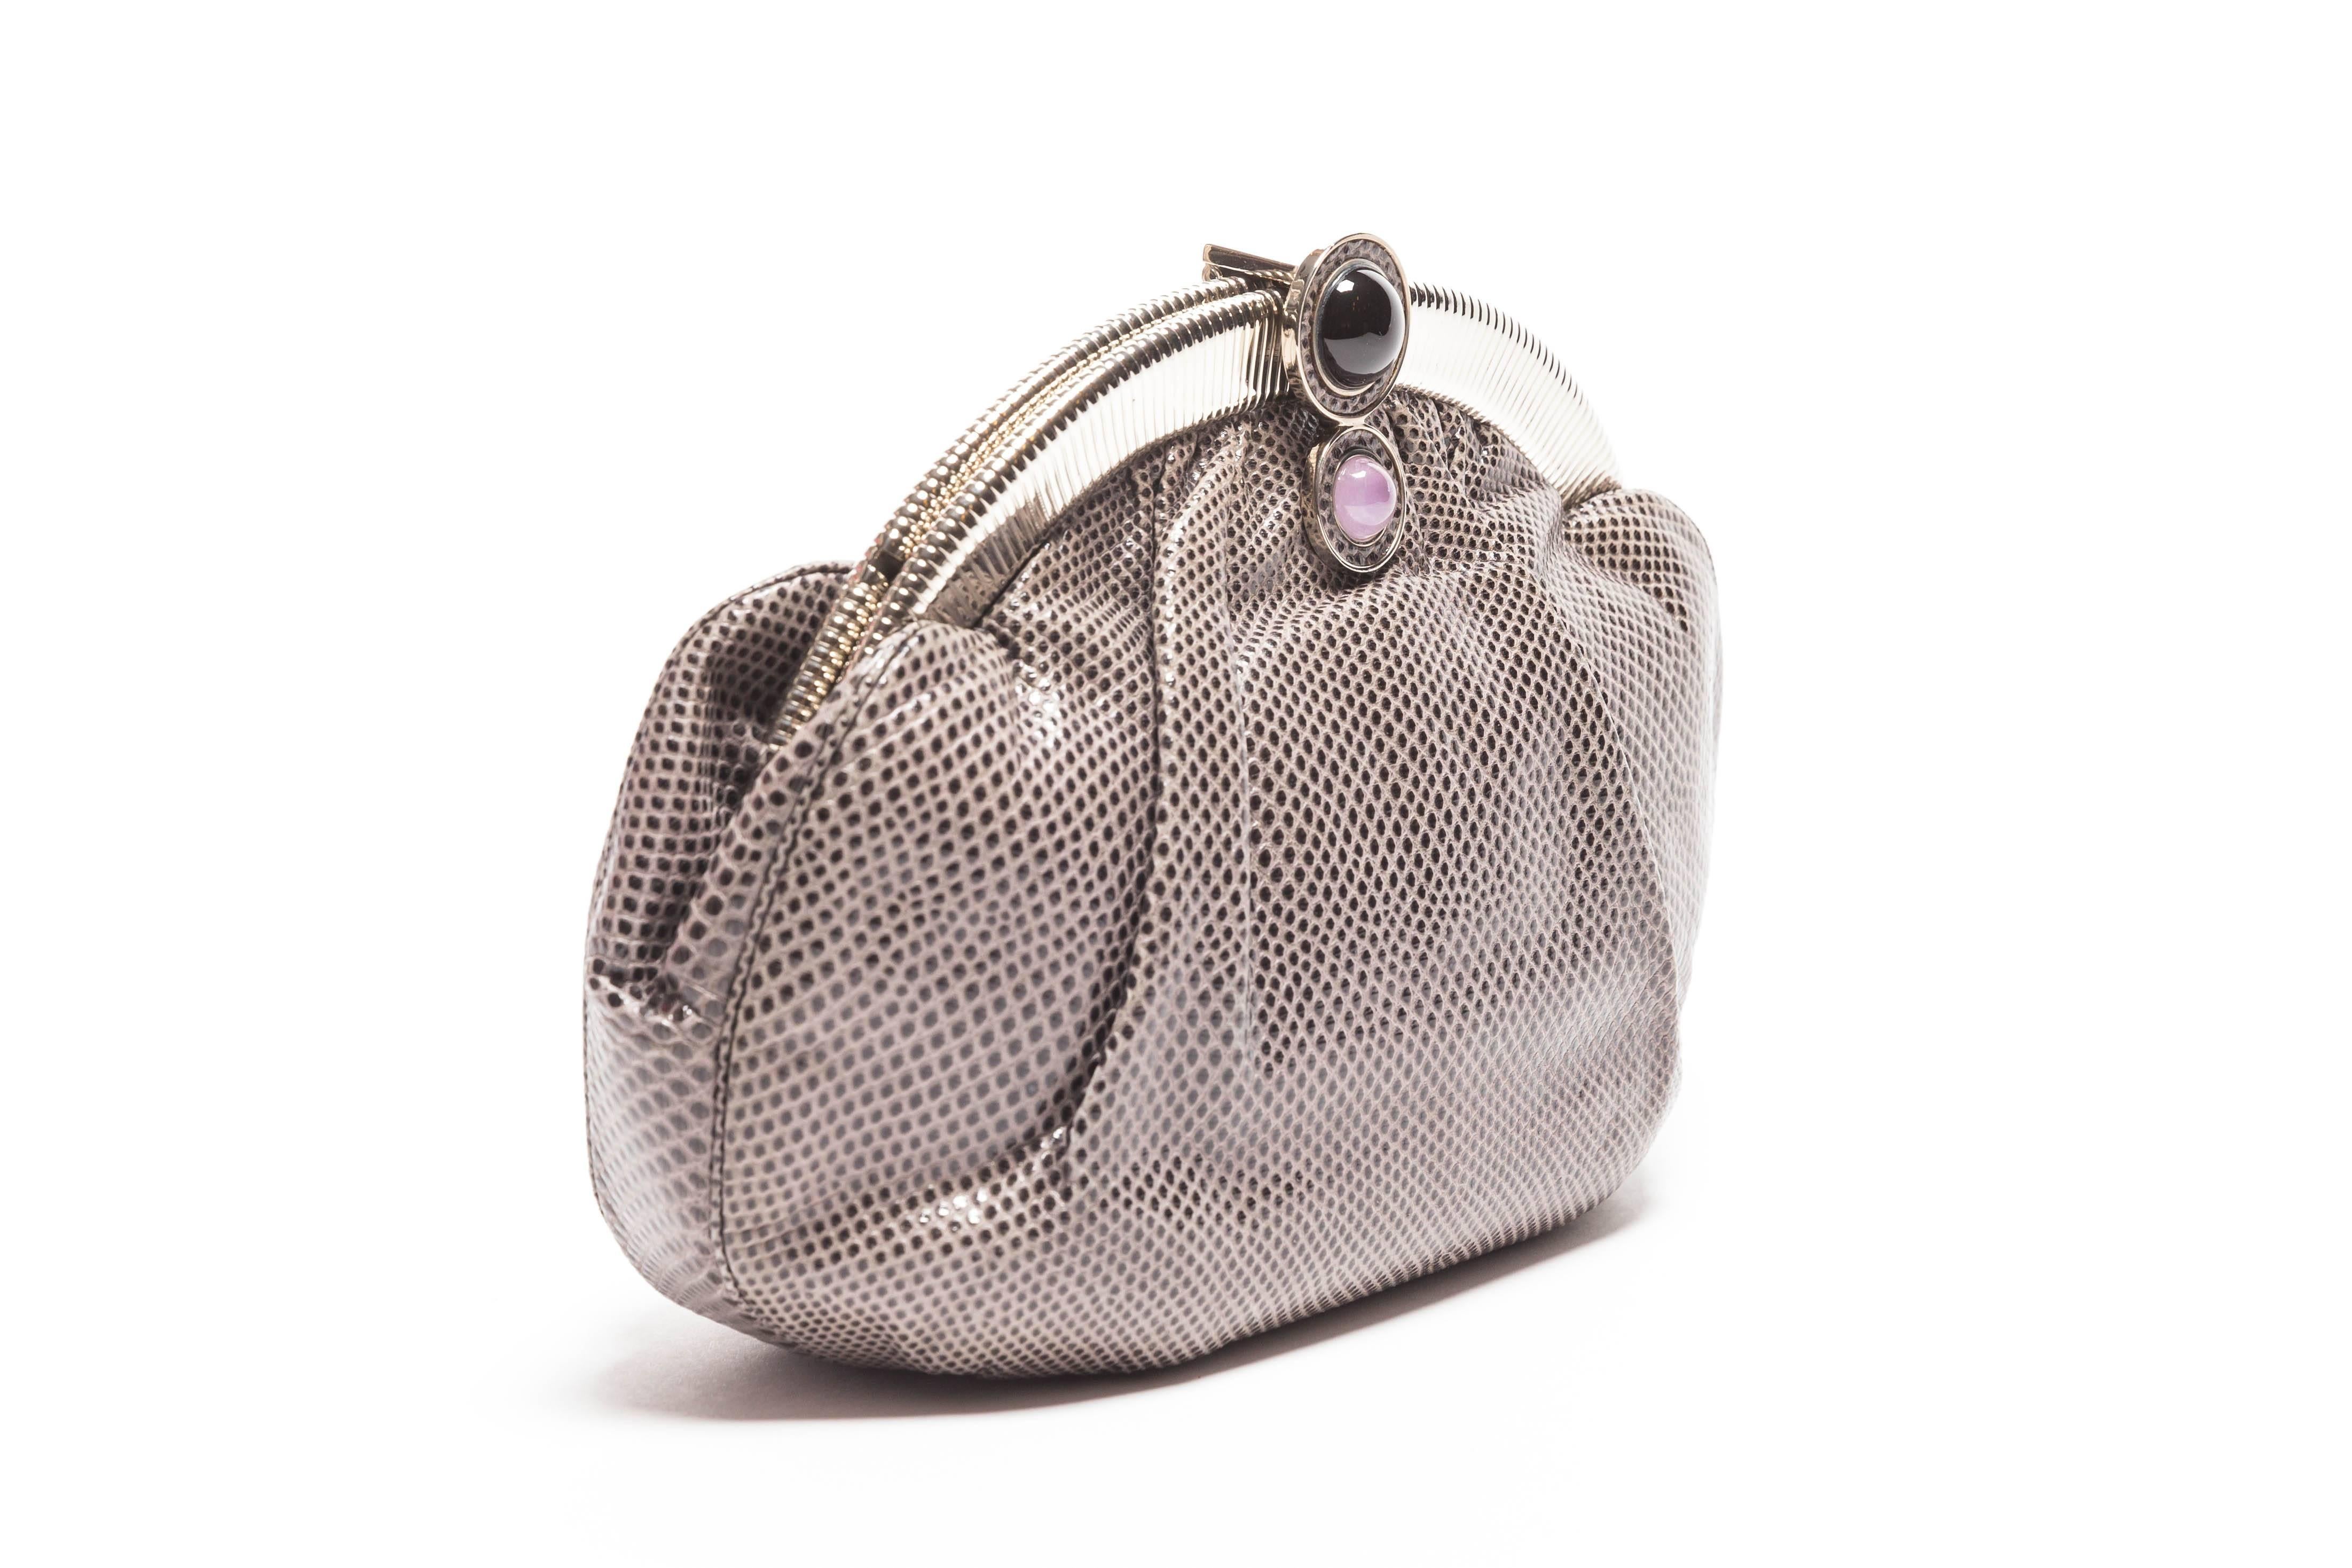 Very beautiful Judith Leiber graphite snakeskin clutch with silver trim and hidden silver shoulder chain.
Pink quartz and onyx cabochon stones accent the bar closure / opener of this bag.
Includes Judith Leiber change purse and comb.
Change purse